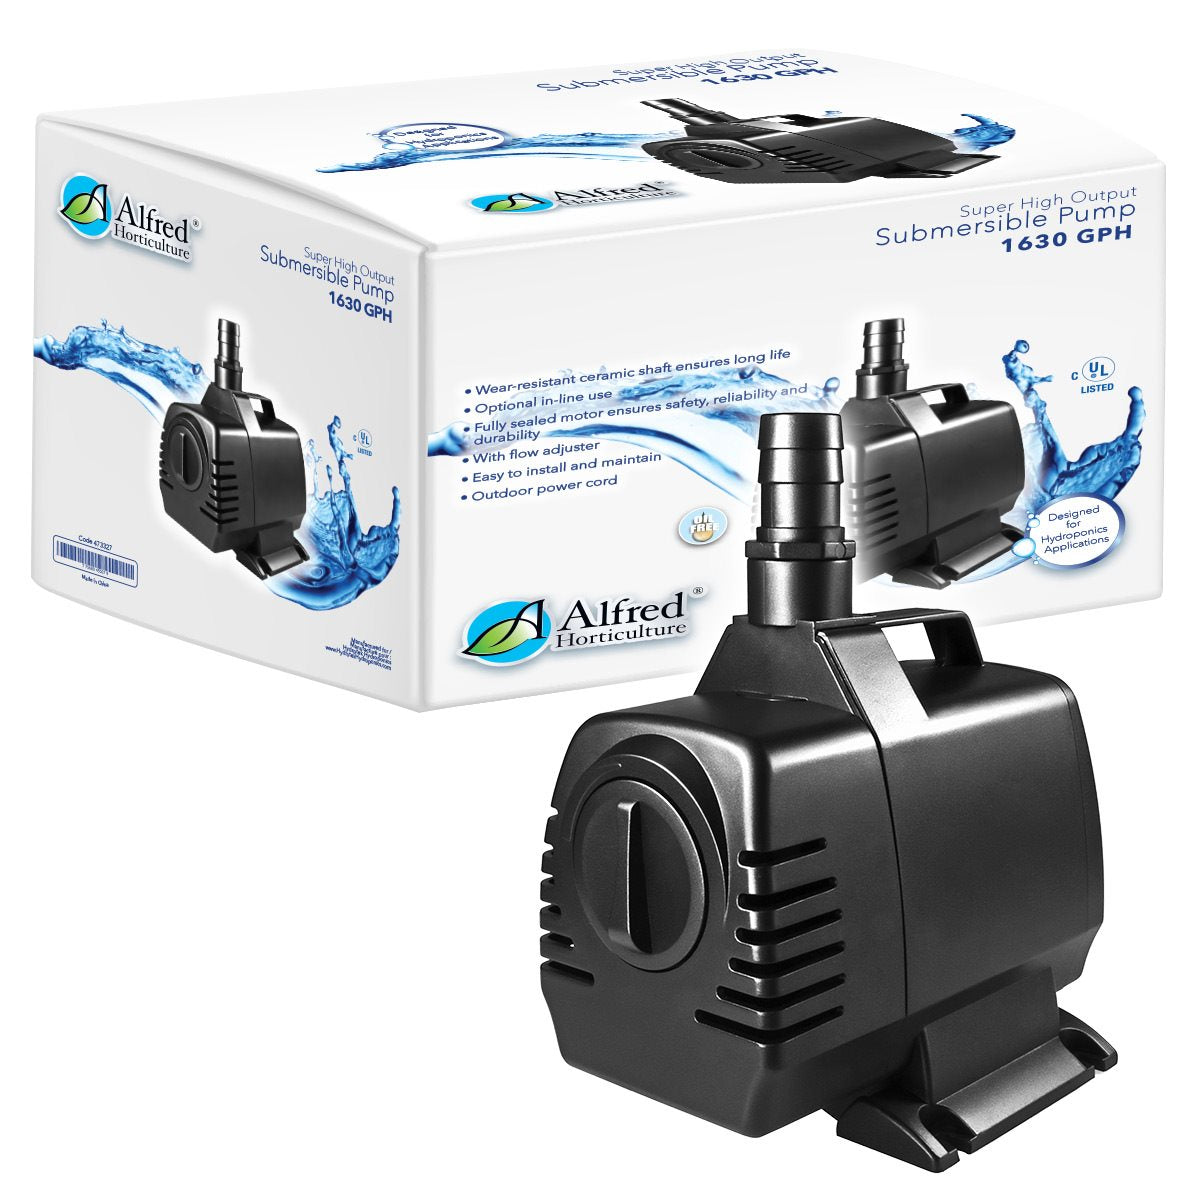 Product Image:Alfred Water Pump 1630GPH